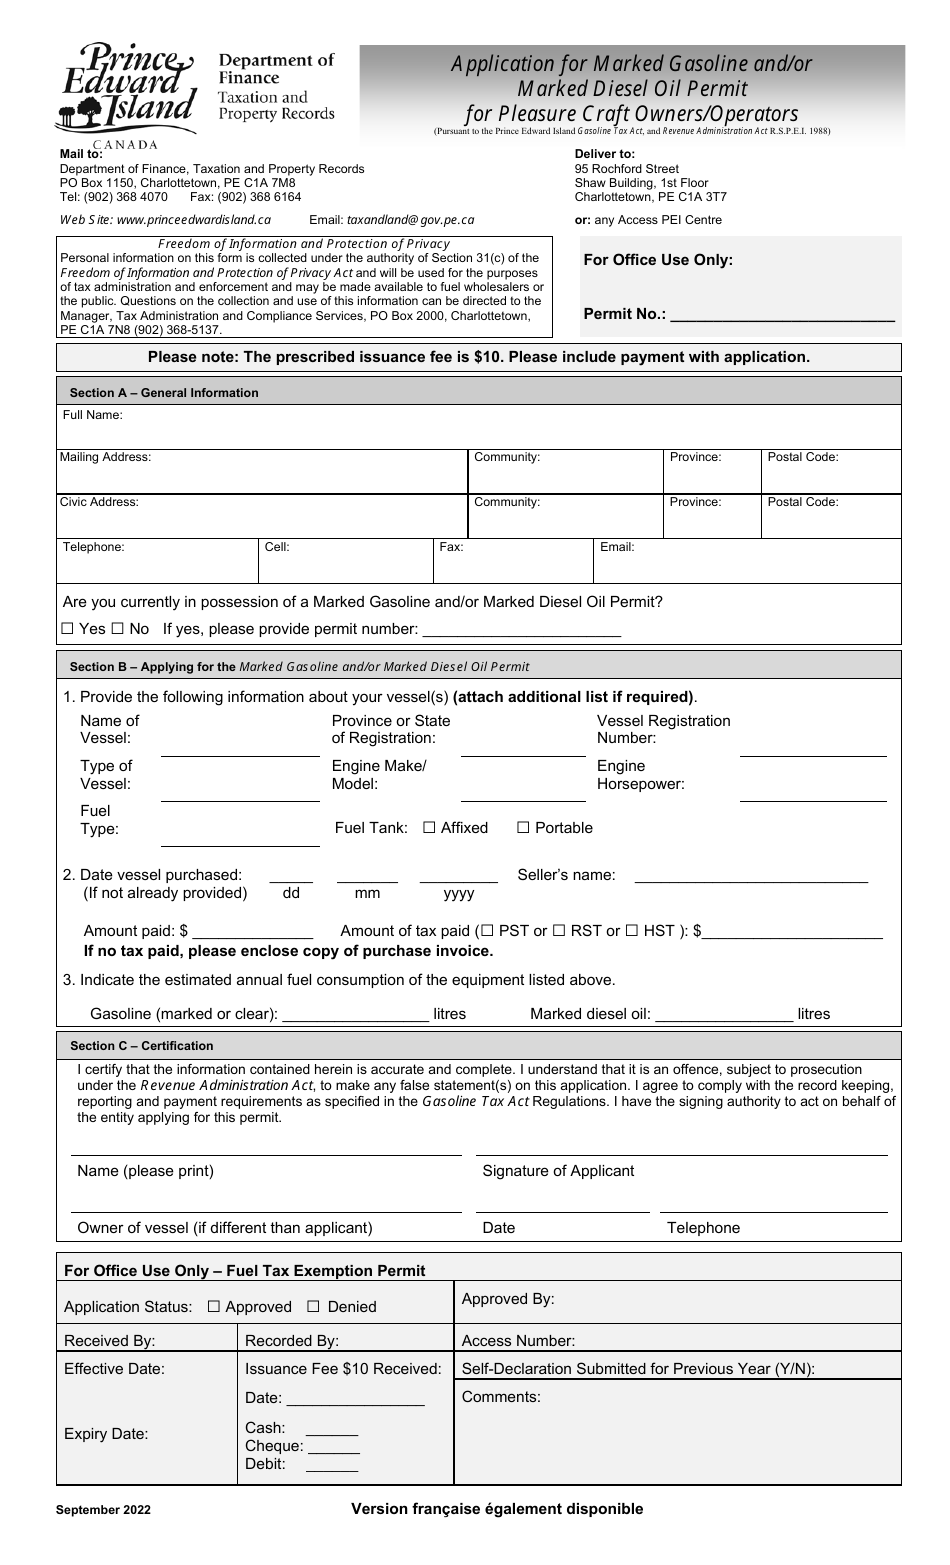 Application for Marked Gasoline and / or Marked Diesel Oil Permit for Pleasure Craft Owners / Operators - Prince Edward Island, Canada, Page 1